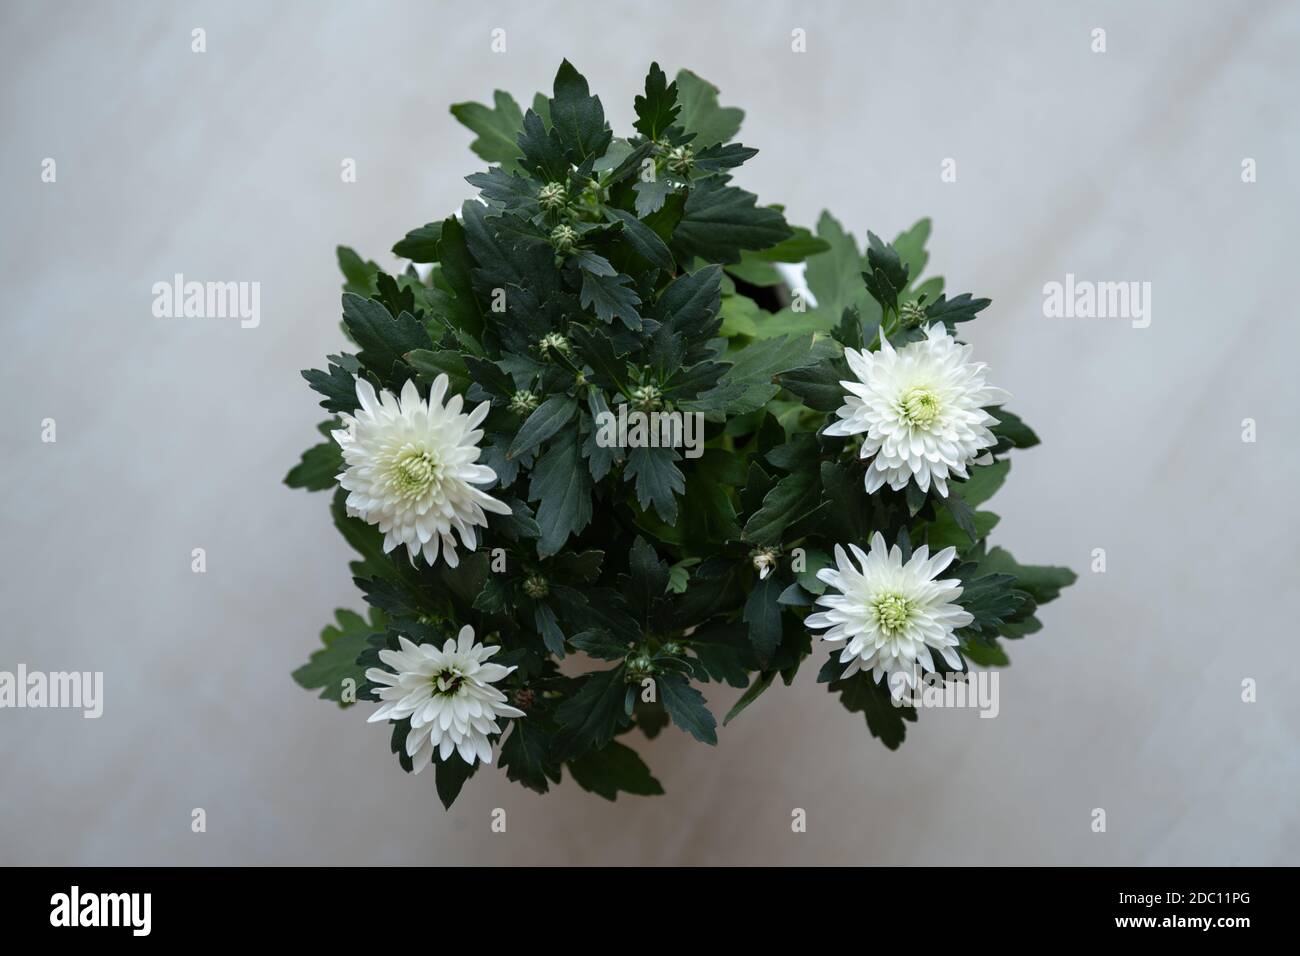 Top view of a White Chrysanthemum (Dendranthema grandiflora) plant and flowers in the pot. Stock Photo